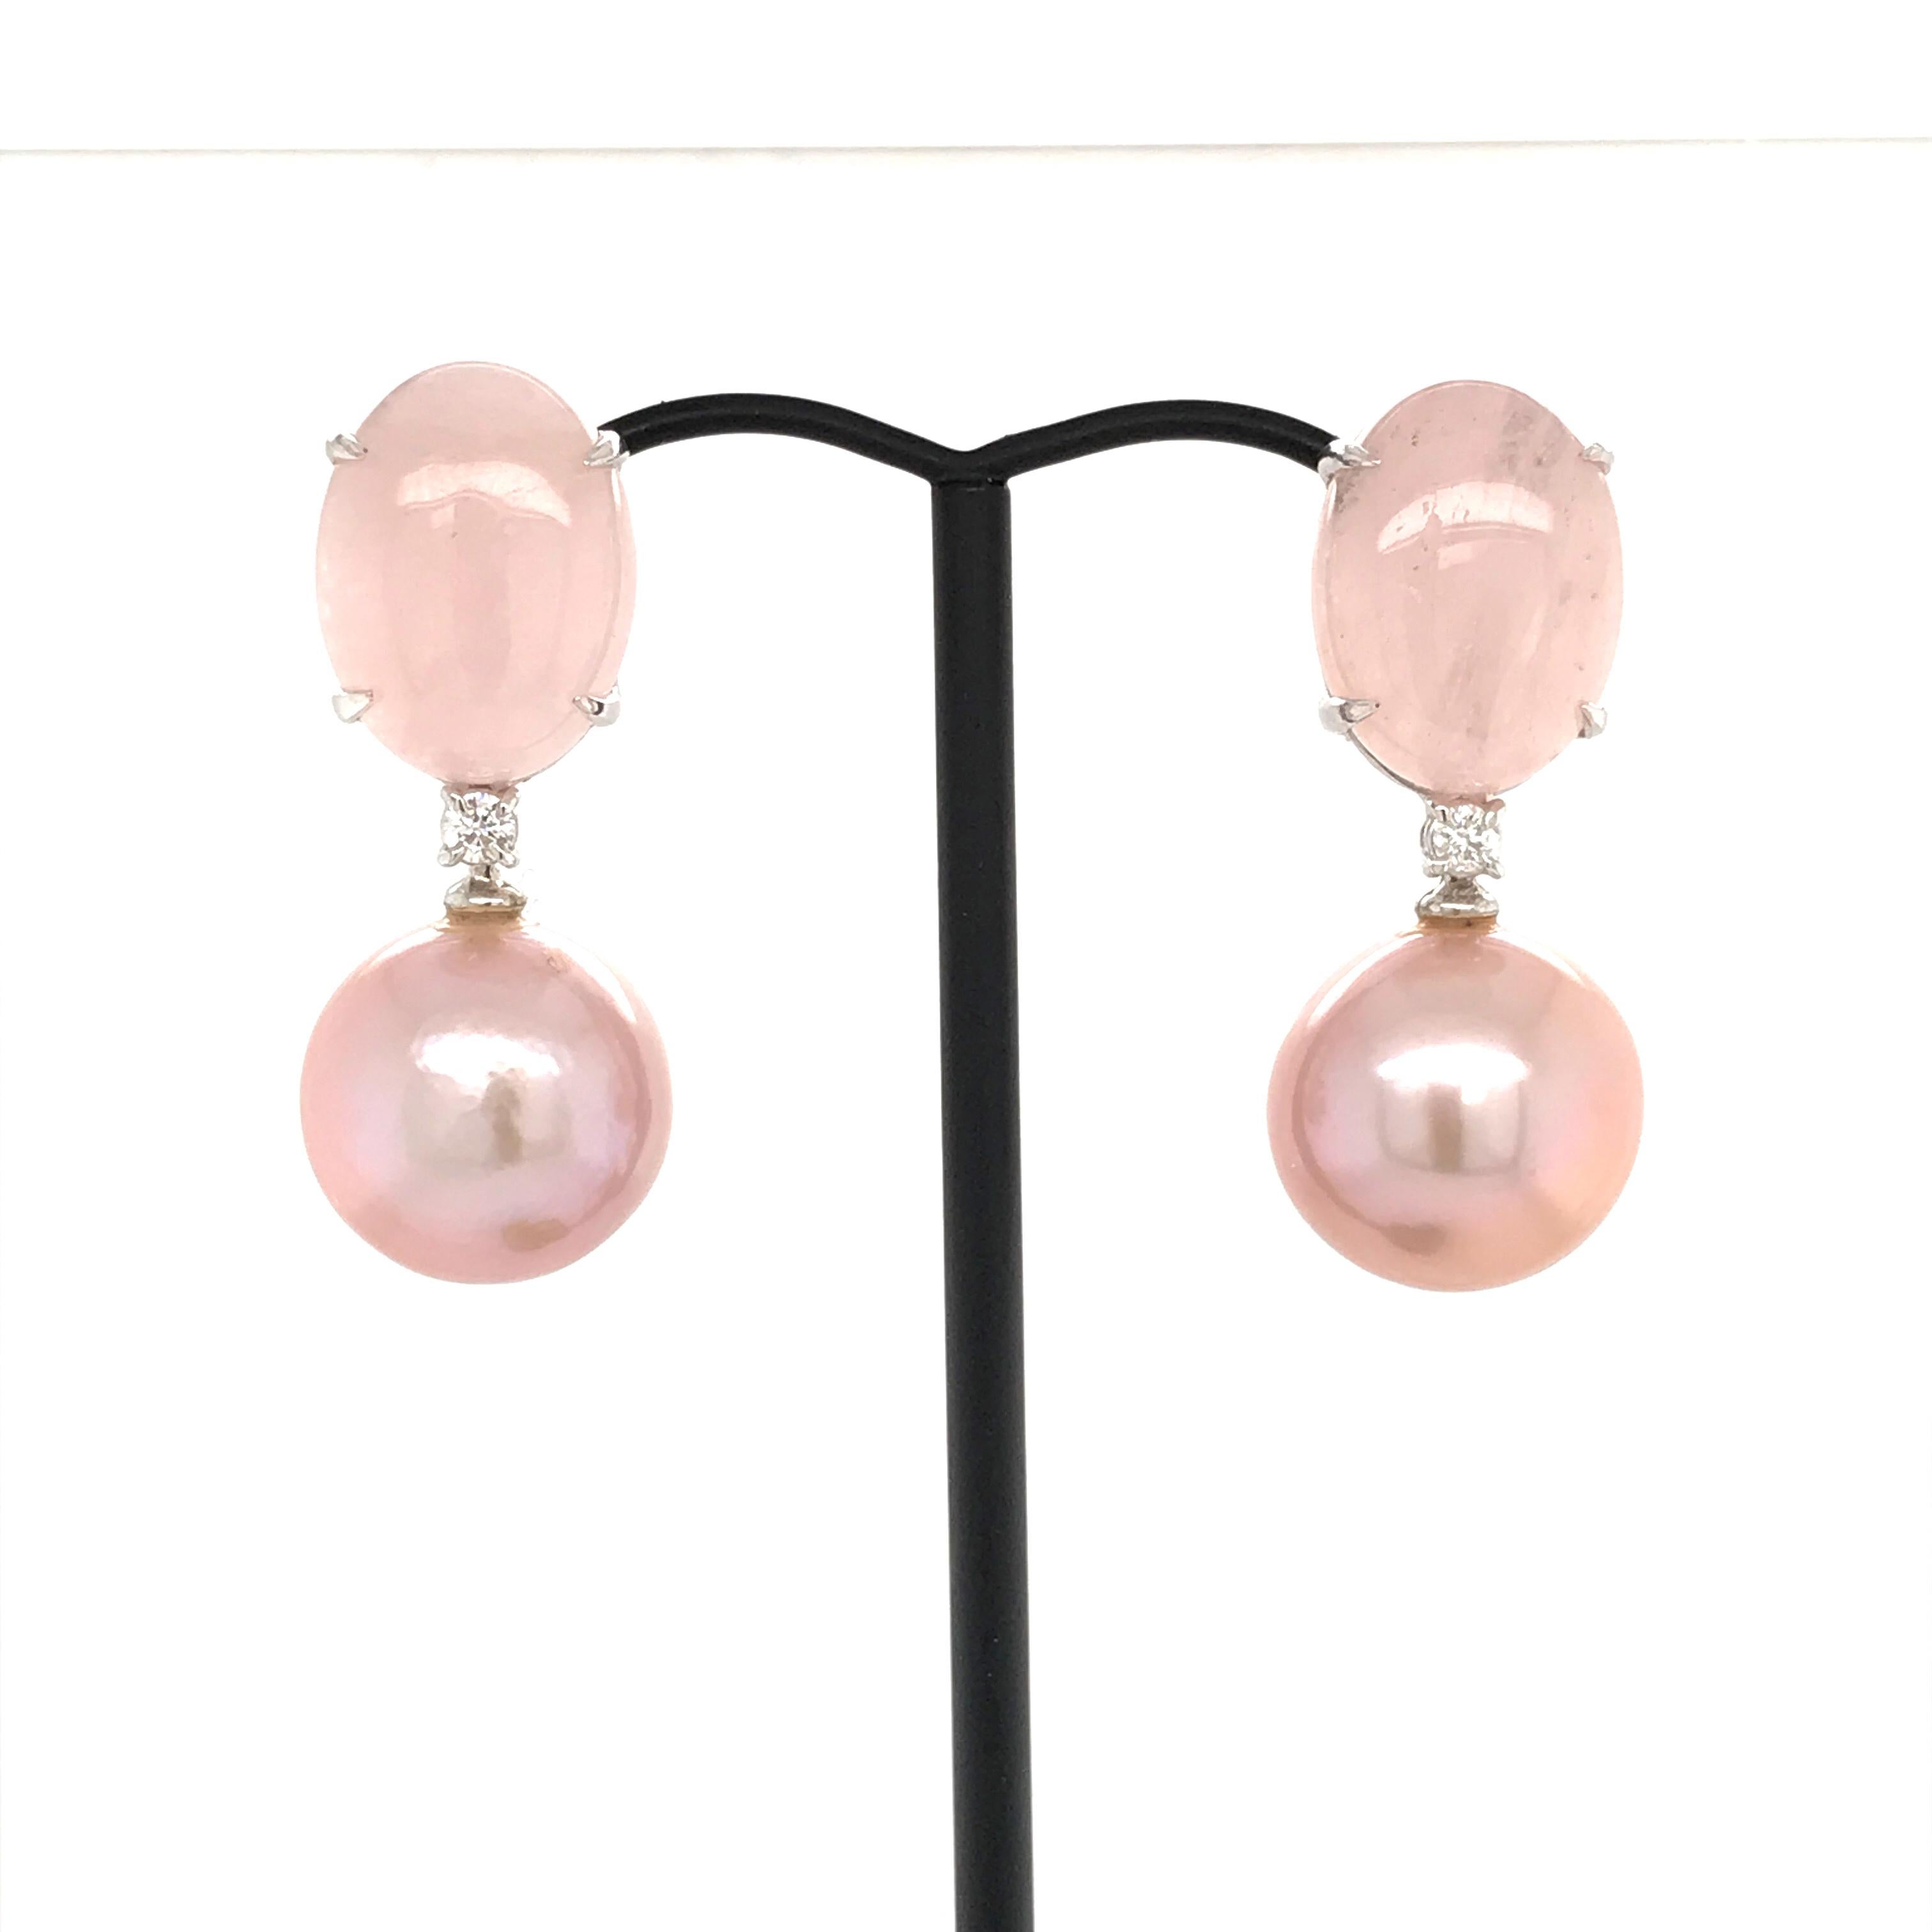 Discover this Cultured Perles pink with 
Natural Morganite
2 White Diamonds shape B 0.140 carat 
White Gold 18K weight 4.25 grams
2 type of Claps   
Chandelier Earrings
Can be adapted to ear not pierced
